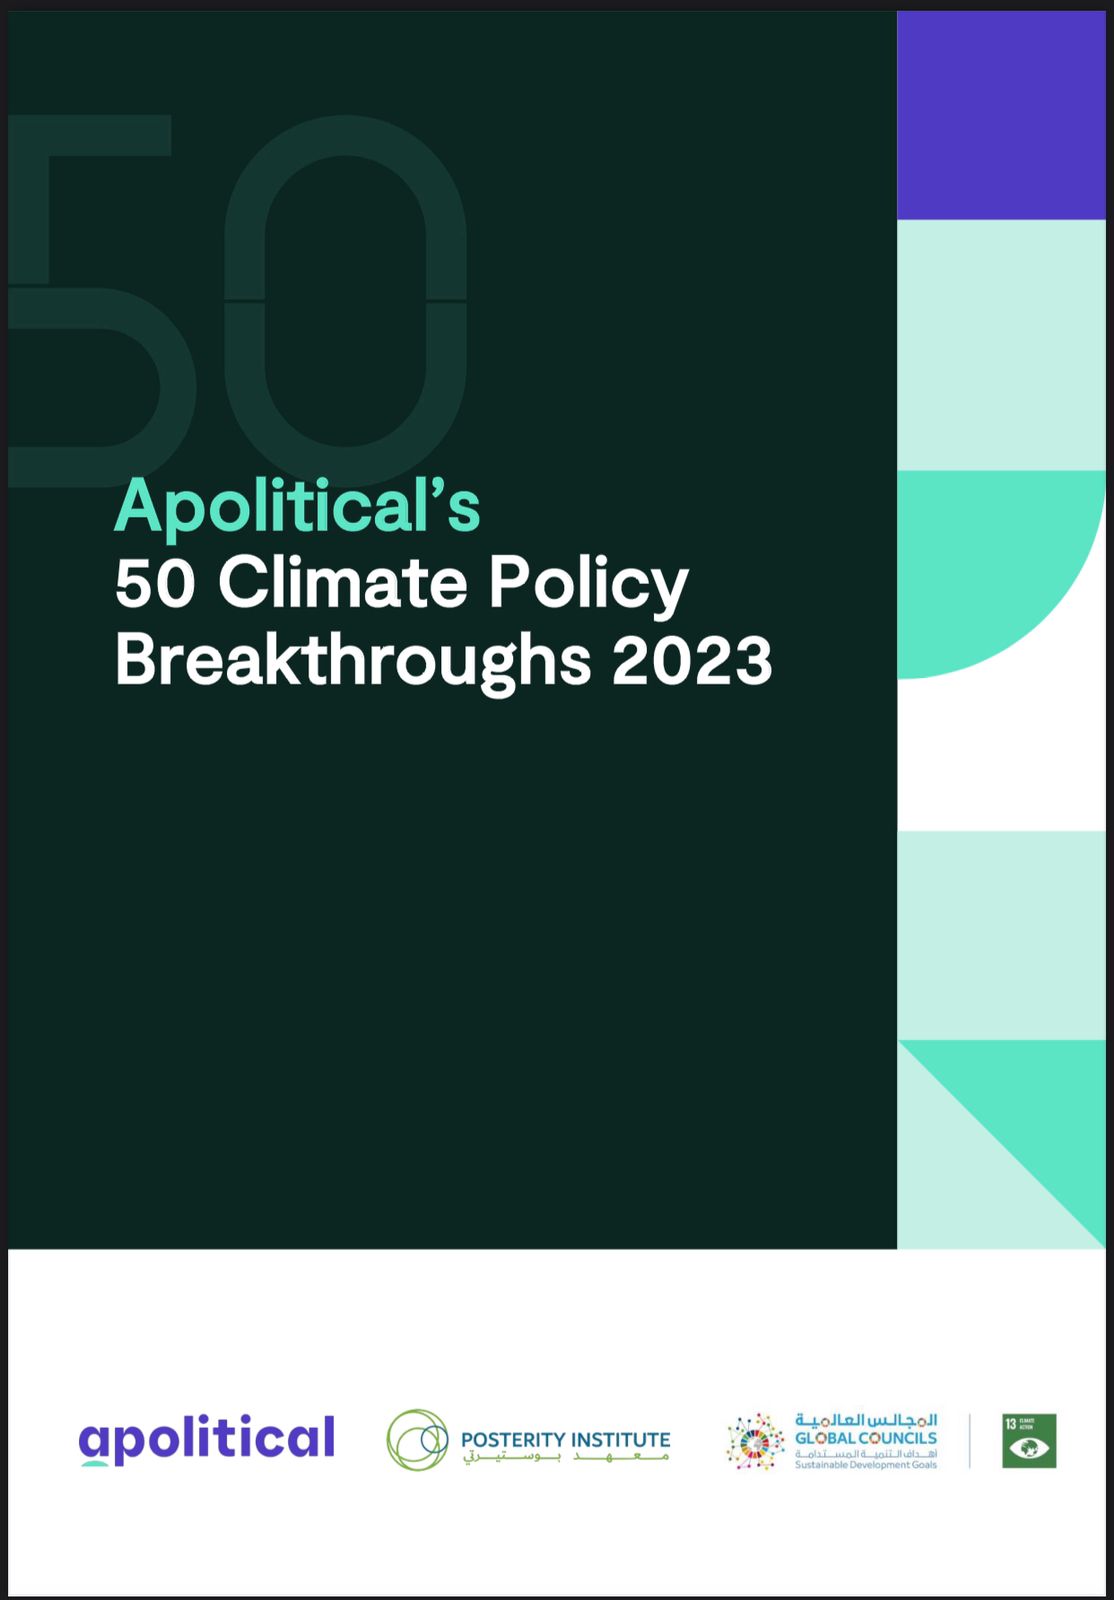 Apolitical's 50 Climate Policy Breakthroughs 2023